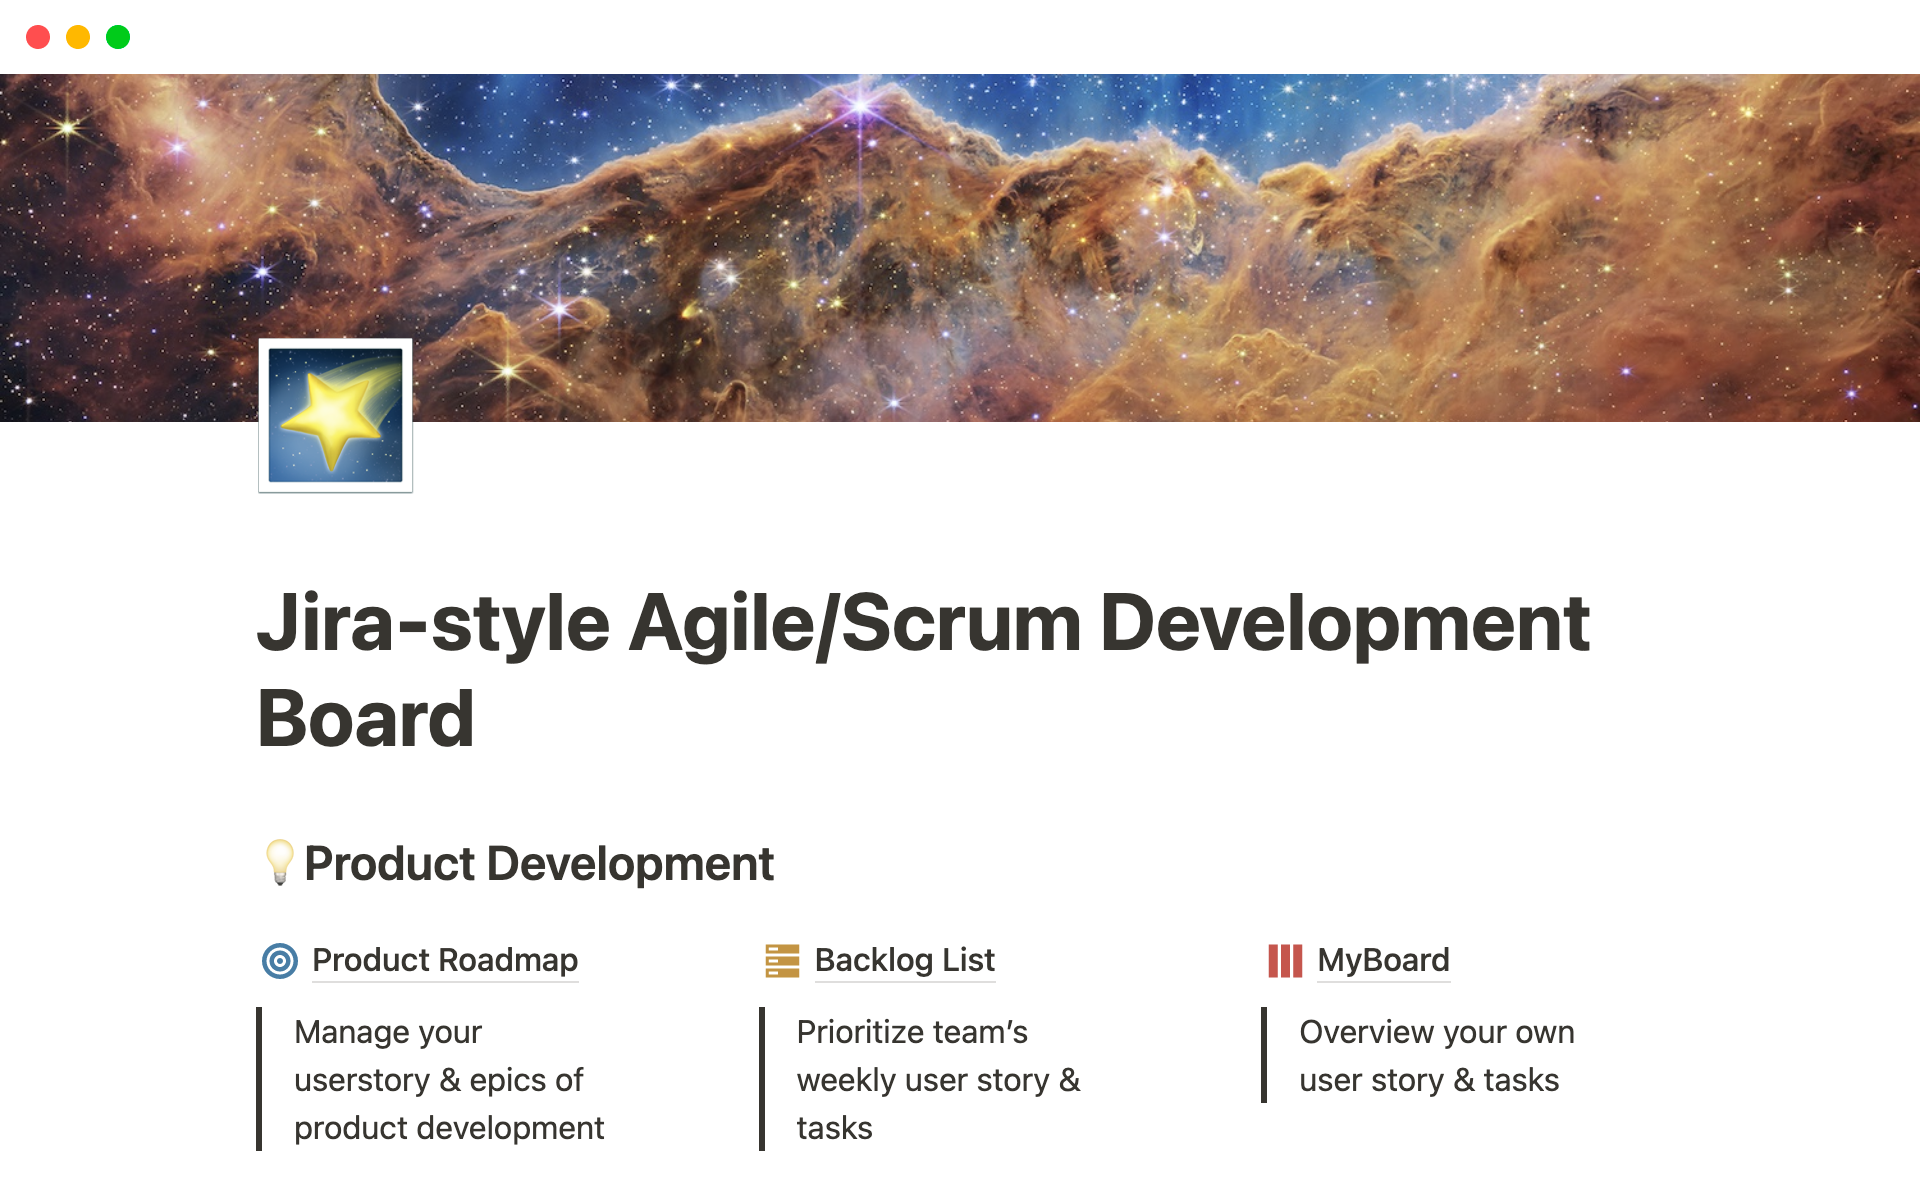 Empower your app design & engineering with this Jira-style agile/scrum software development tool.